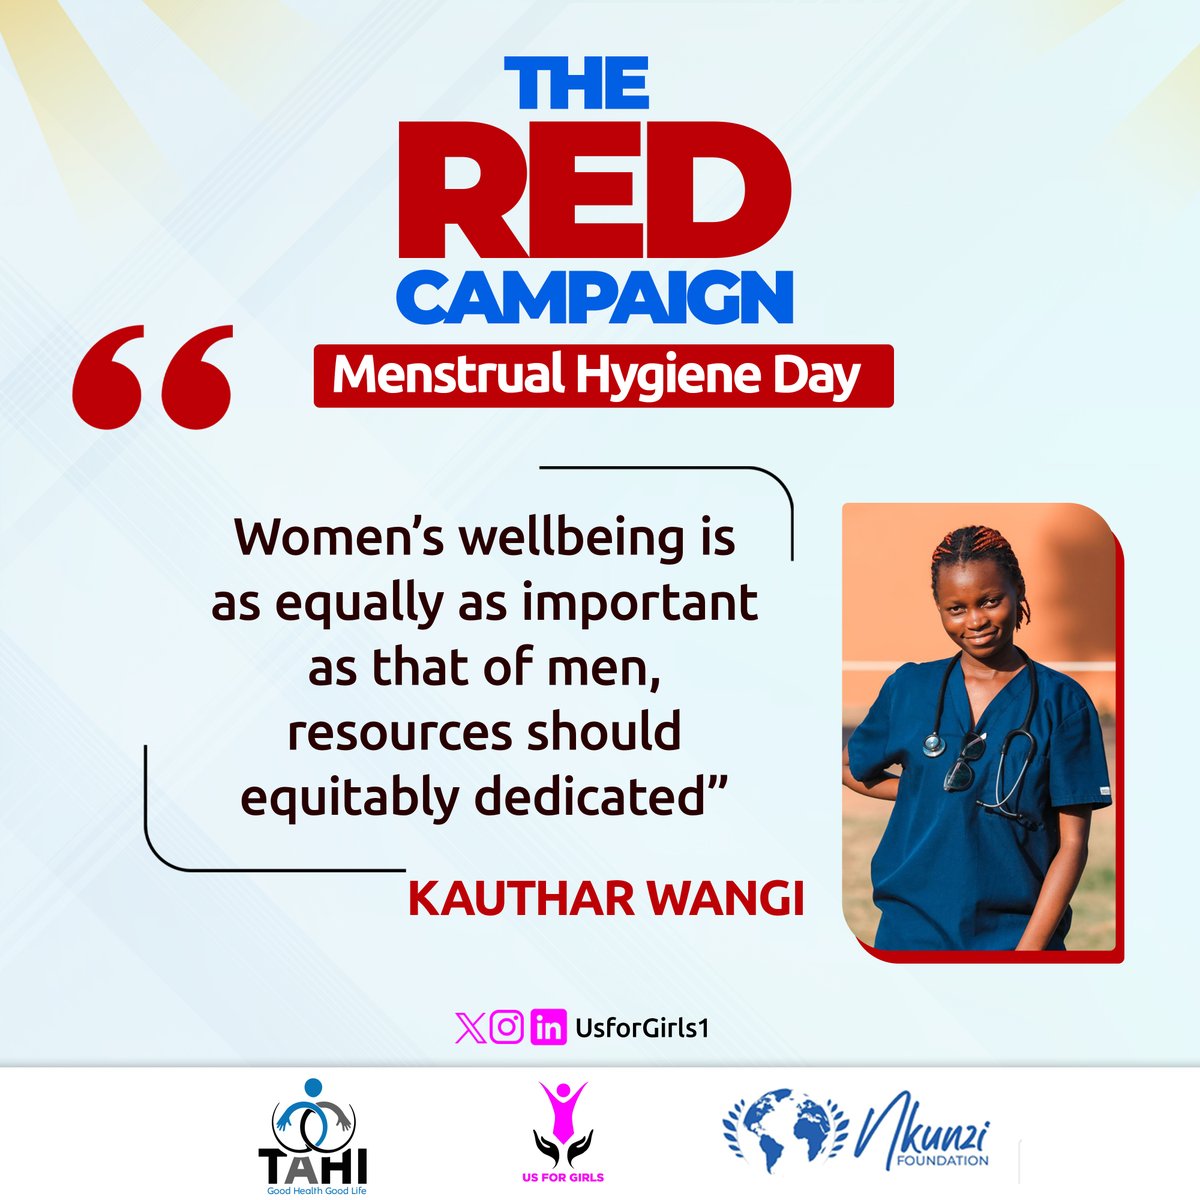 #RedCampaign

@KautharWangi tells us that women's well being is as equally important as that of men, and thus resources should be equitably dedicated.
#EndPeriodPoverty
#EndPeriodStigma
#MHDay